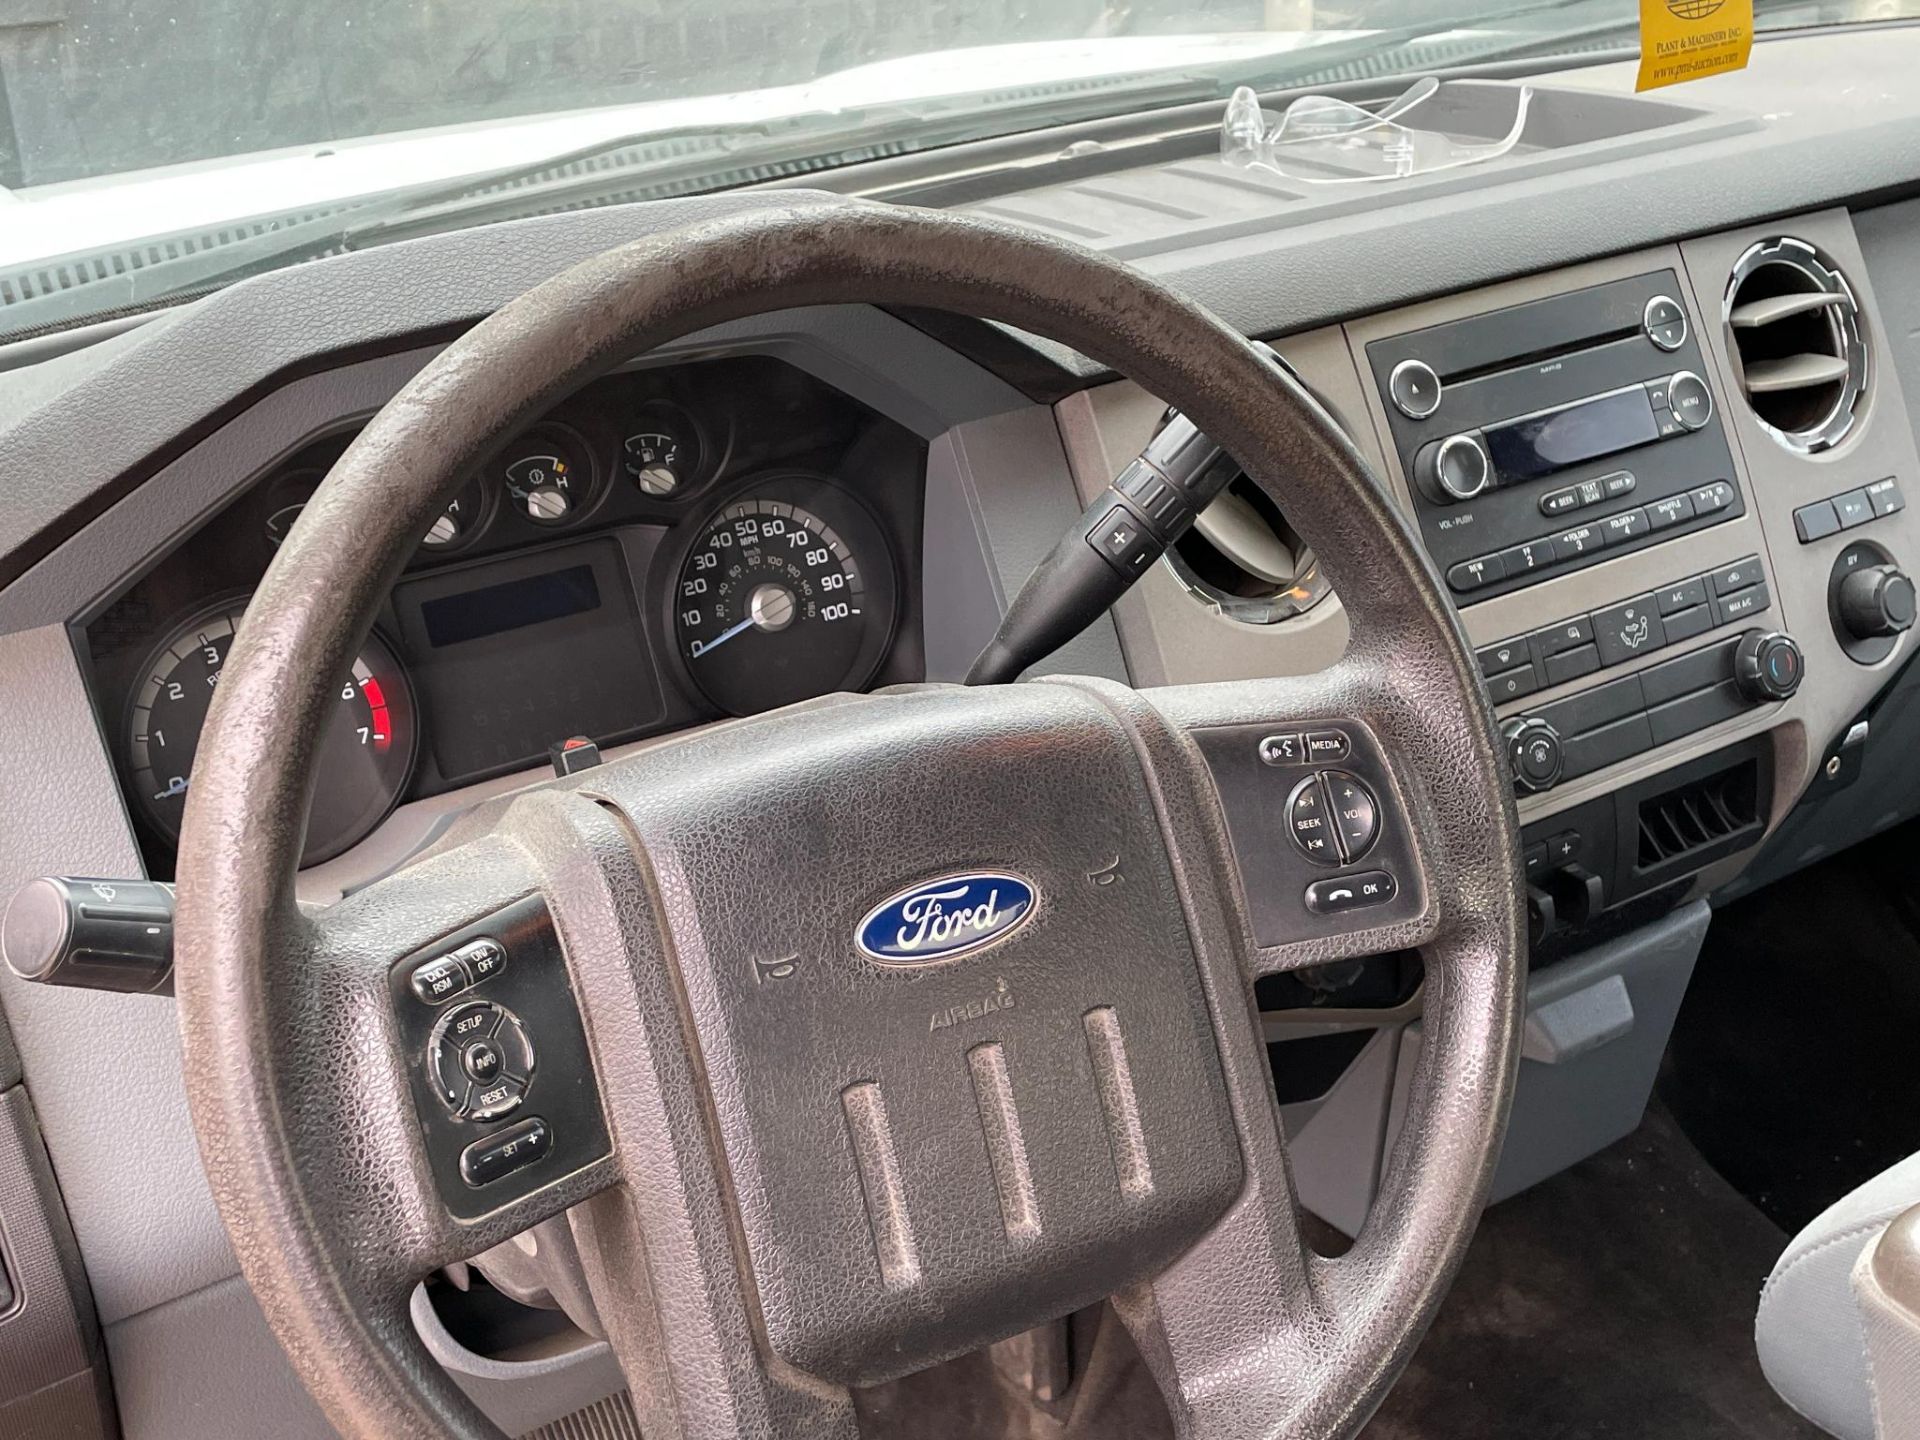 PICKUP TRUCK, 2013 FORD F-250 SUPER DUTY, 4X4, gasoline, extended cab, 123,494 miles, VIN - Image 10 of 15